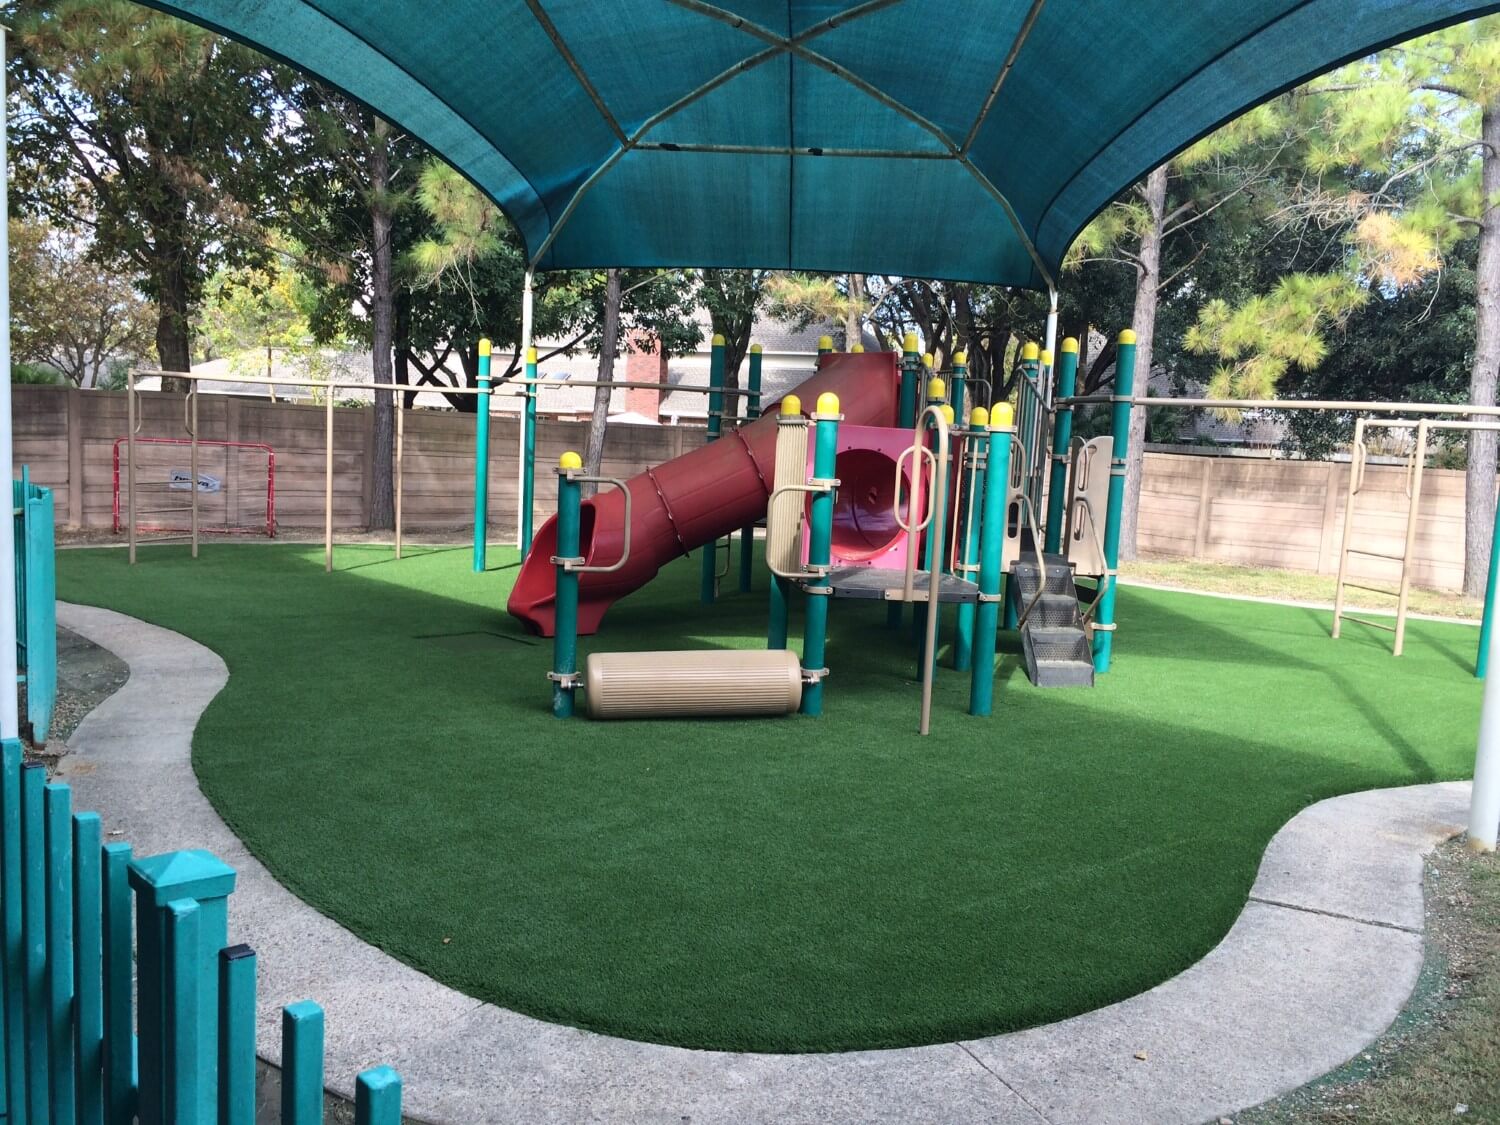 red slide installed on artificial playground grass